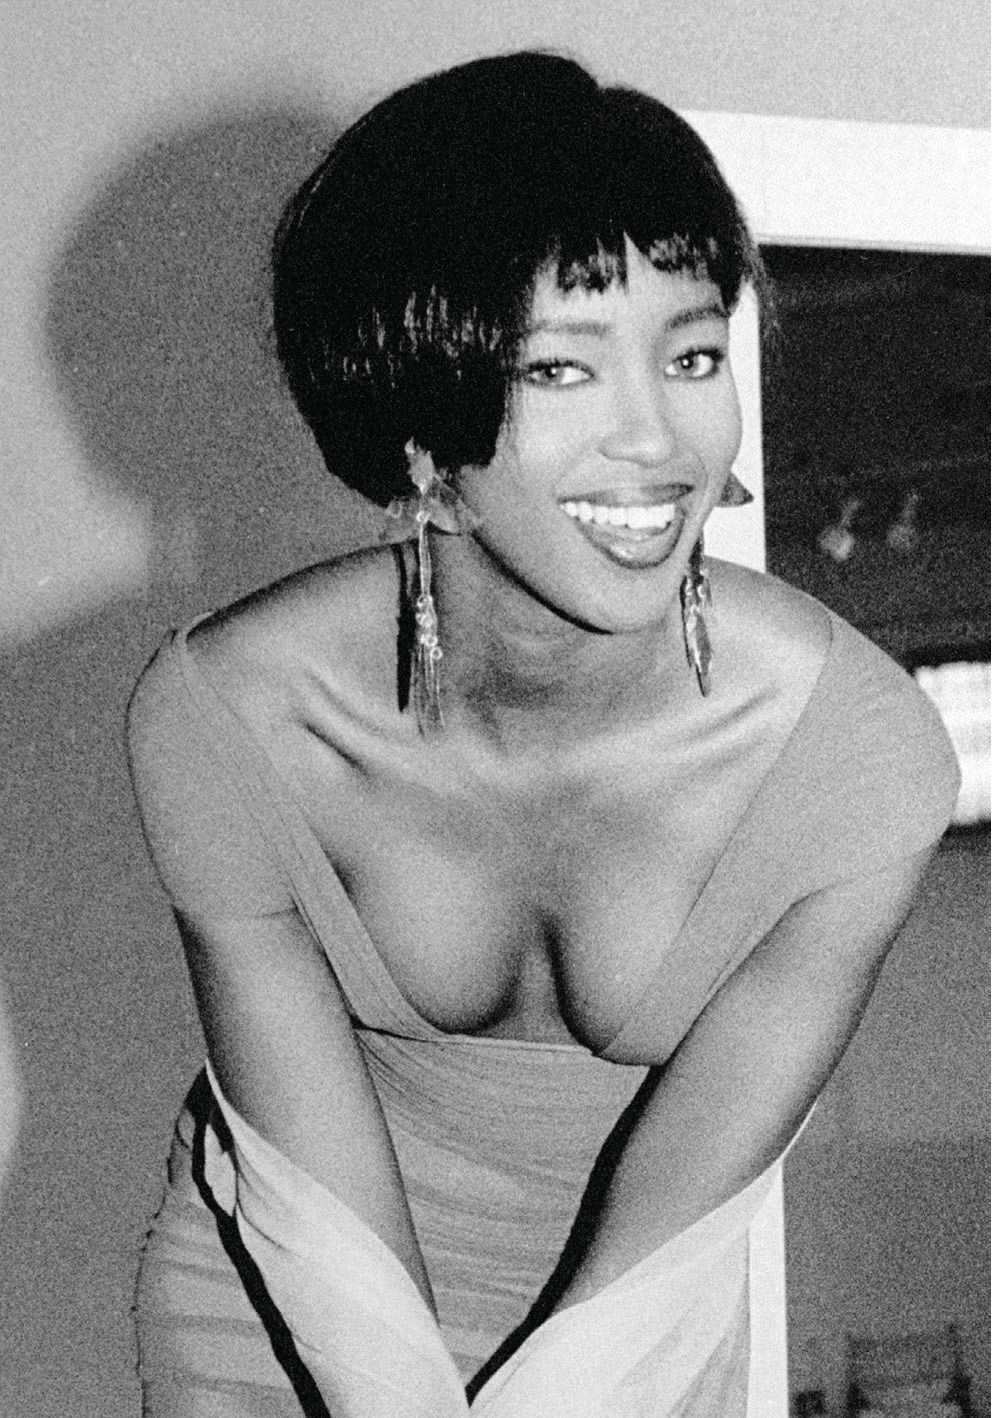 Naomi Campbell in 1990 PHOTO BY RICHARD CORKERY/NY DAILY NEWS VIA GETTY IMAGES